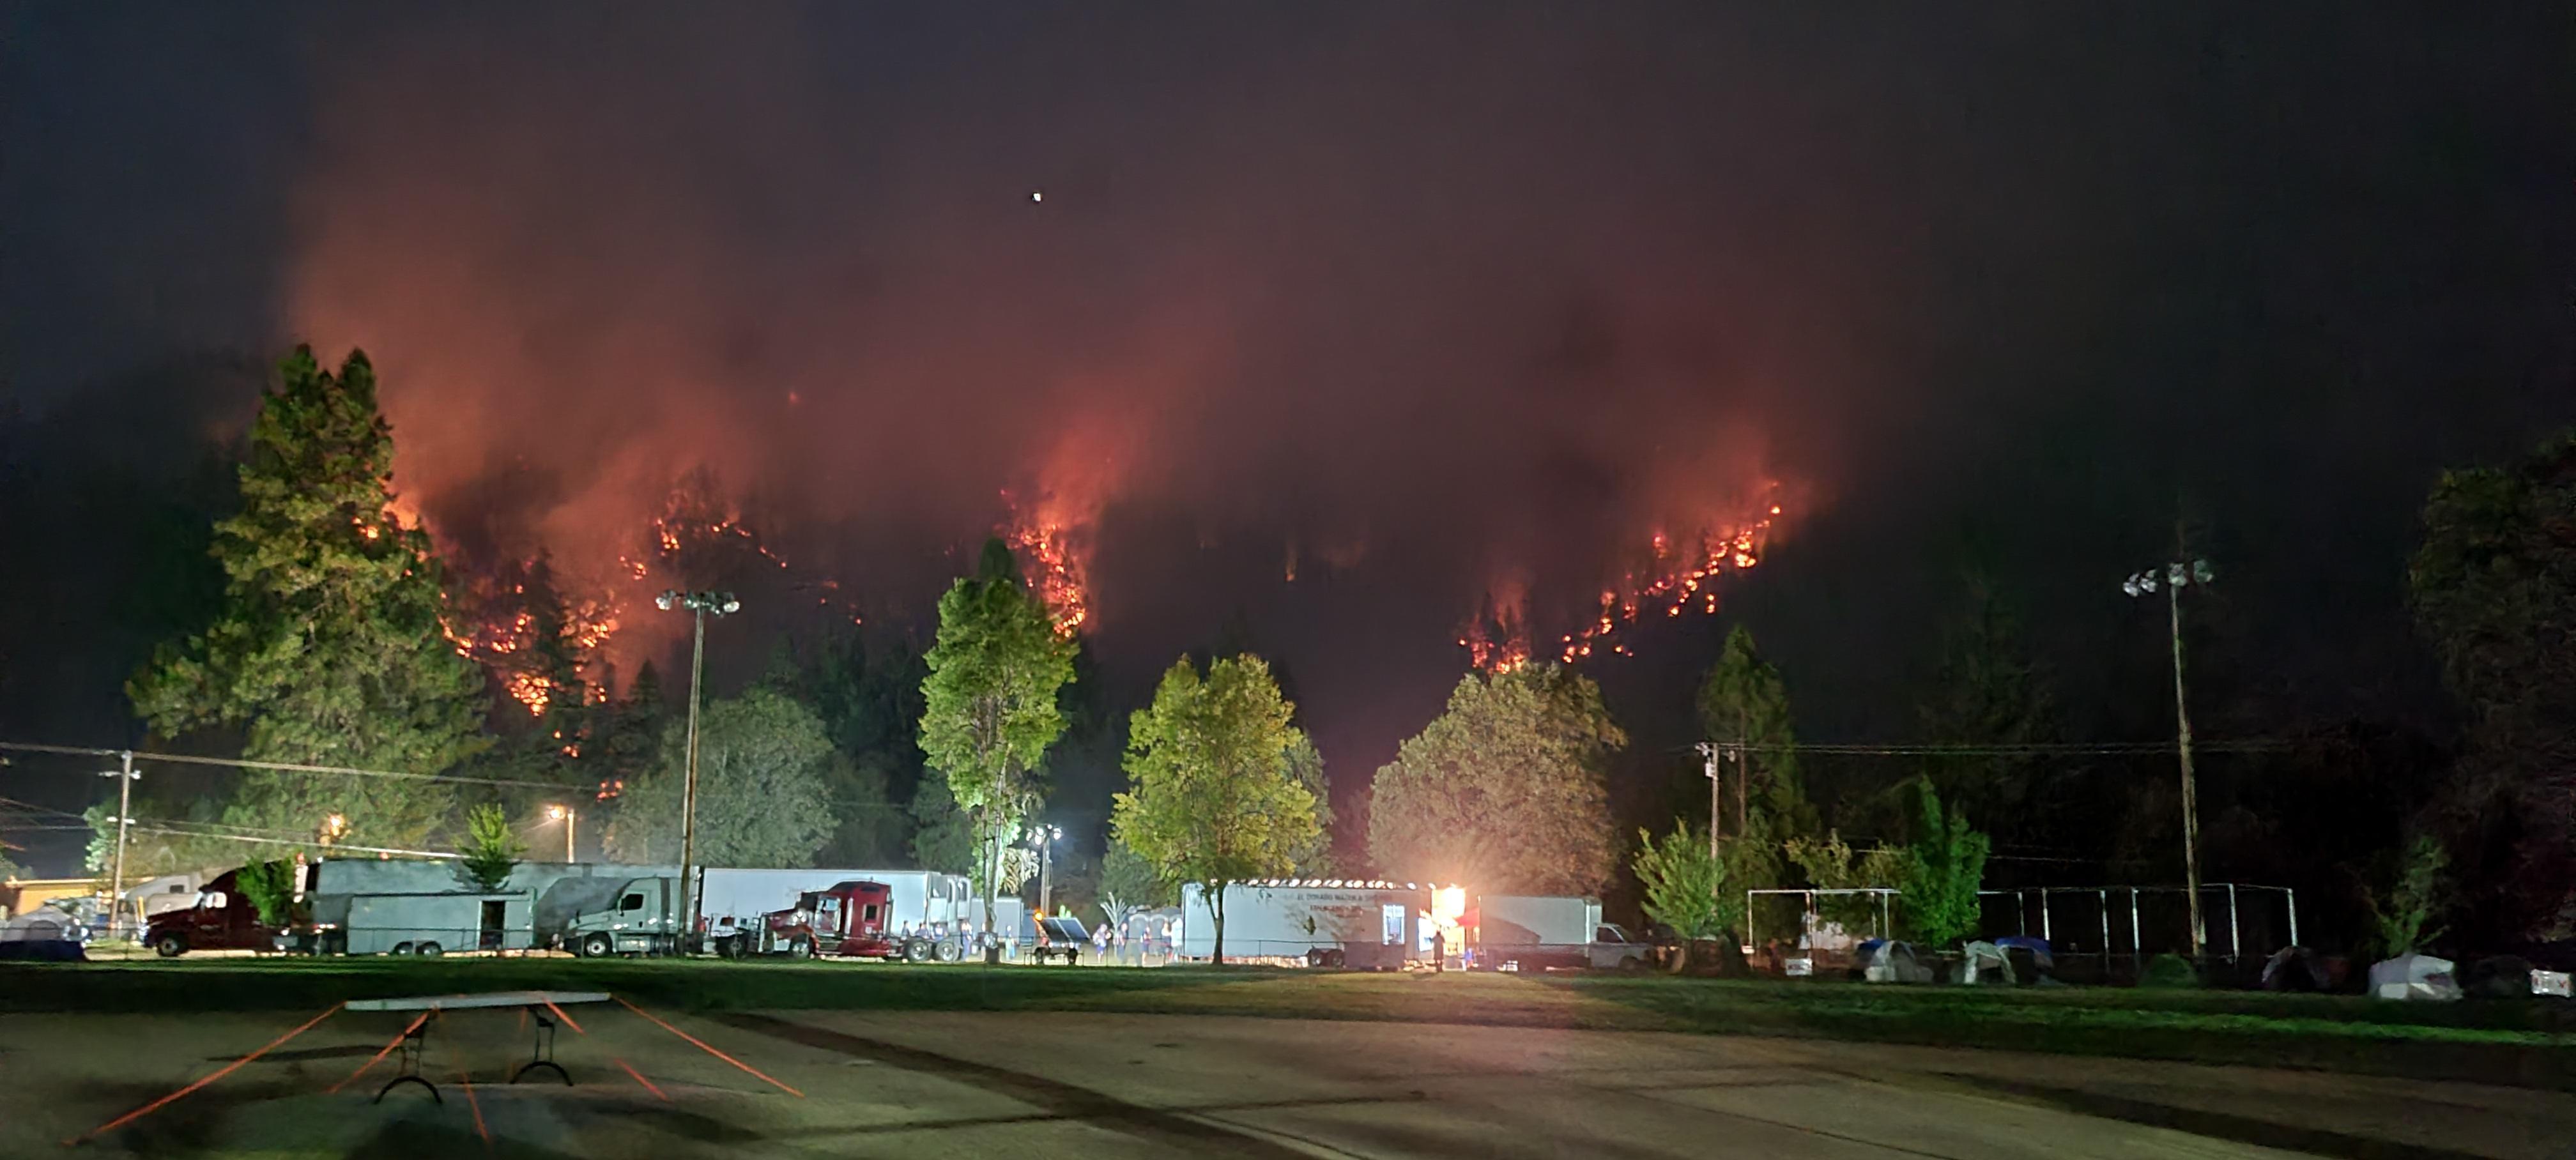 Photo depicts fire response support vehicles and trailers in a parking lot at the base of a steep forested slope. It's night and the dark trees on the slope are alight with fire glow.